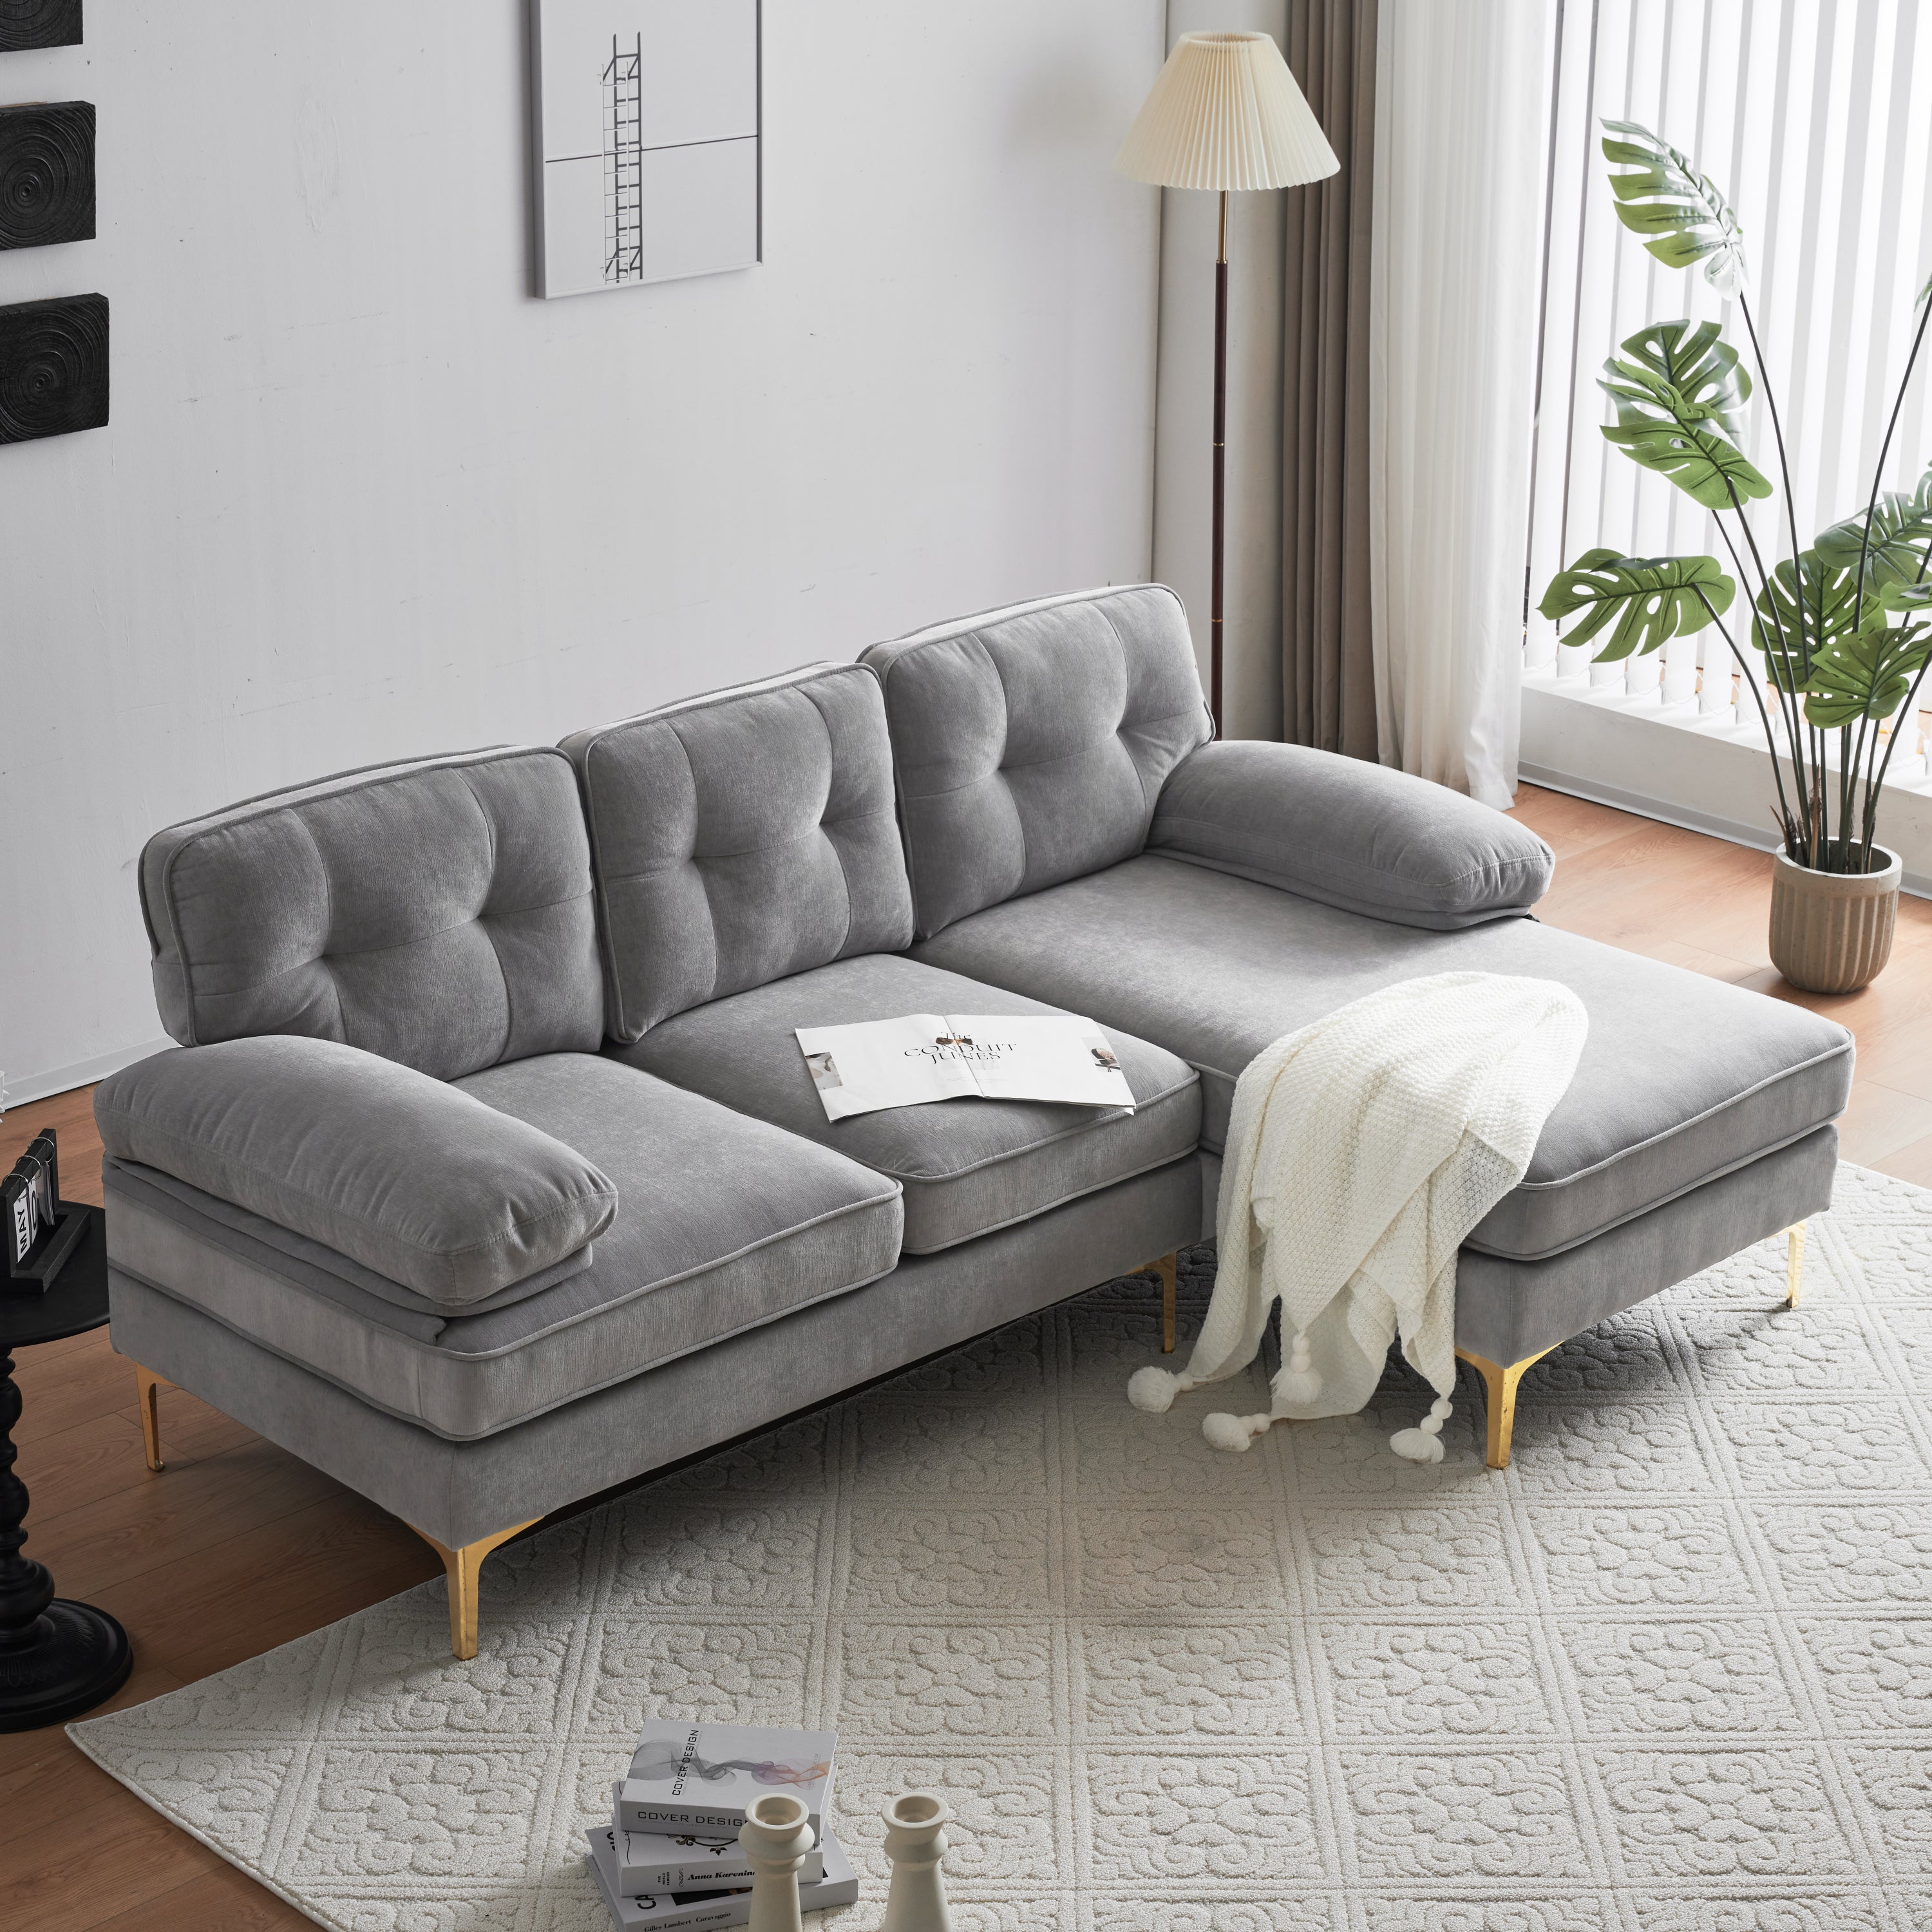 Modern Velvet L-Shaped Sectional Sofas for Living Room, Bedroom | Light Grey | Stylish and Comfortable Addition to Your Home Decor-Stationary Sectionals-American Furniture Outlet